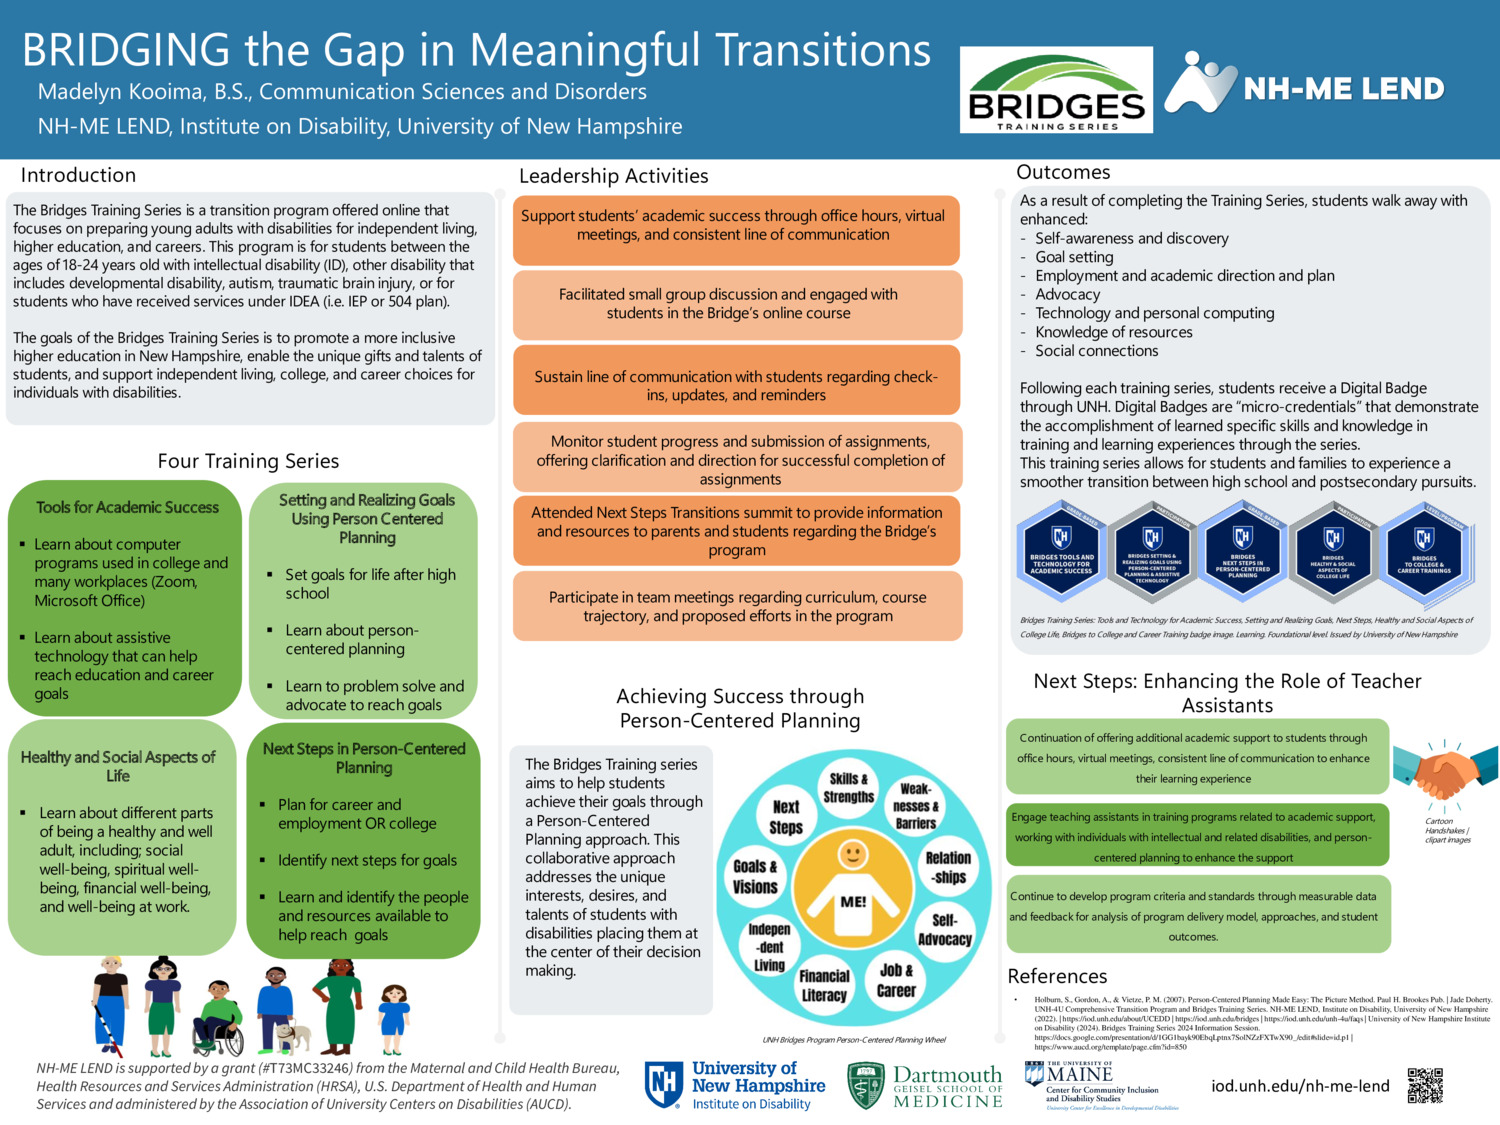 Bridging The Gap In Meaningful Transitions by madelynkooima